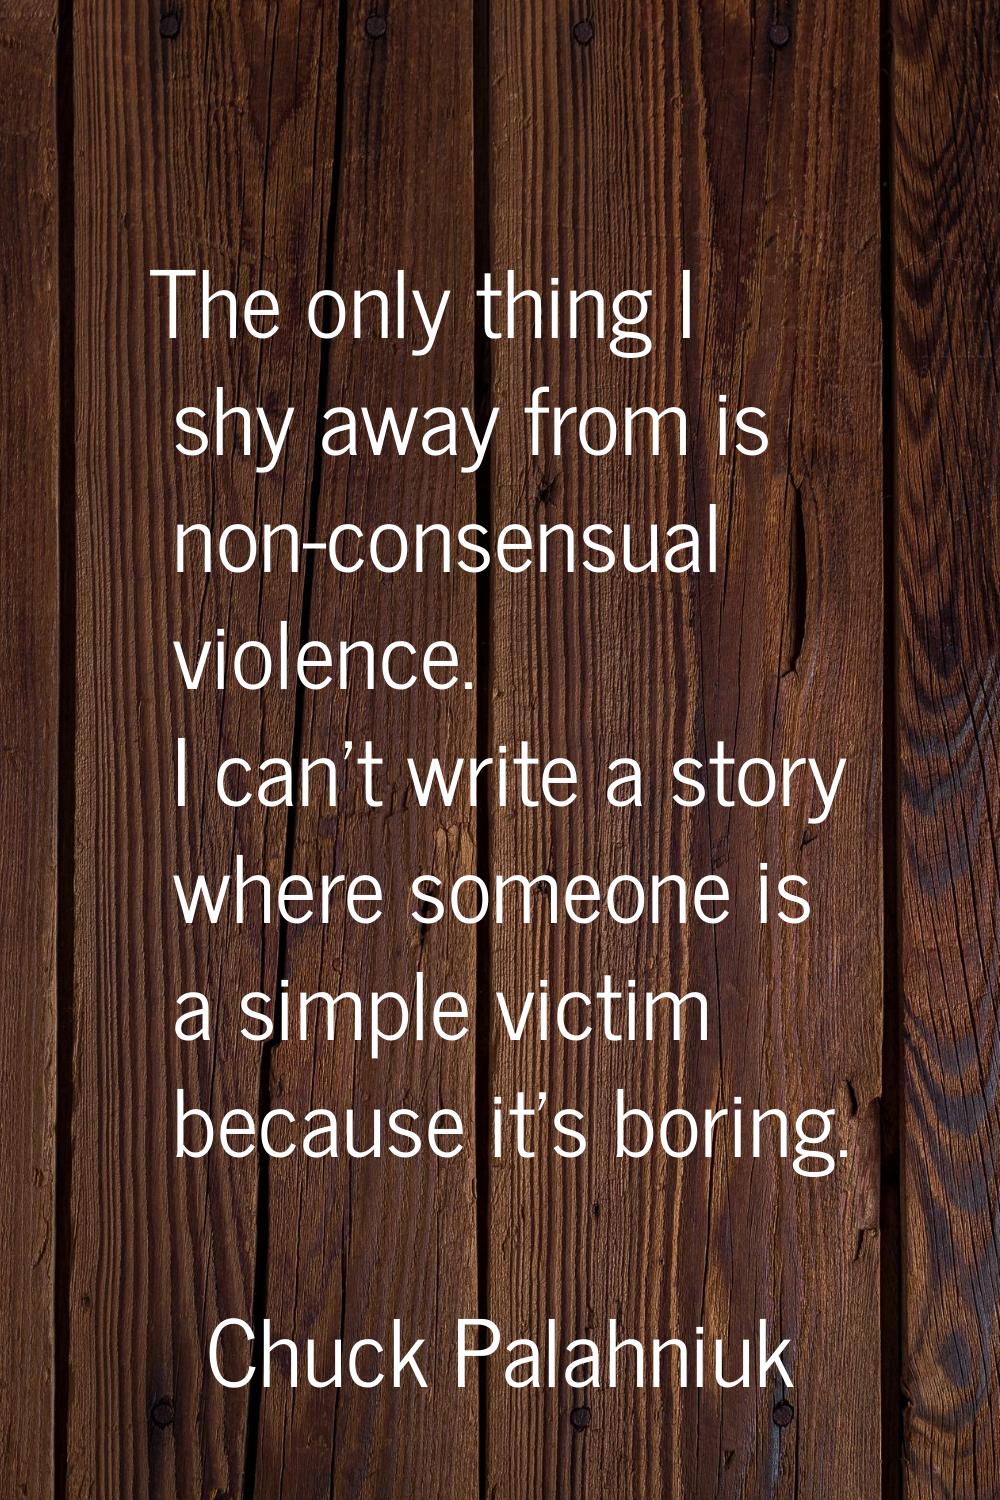 The only thing I shy away from is non-consensual violence. I can't write a story where someone is a